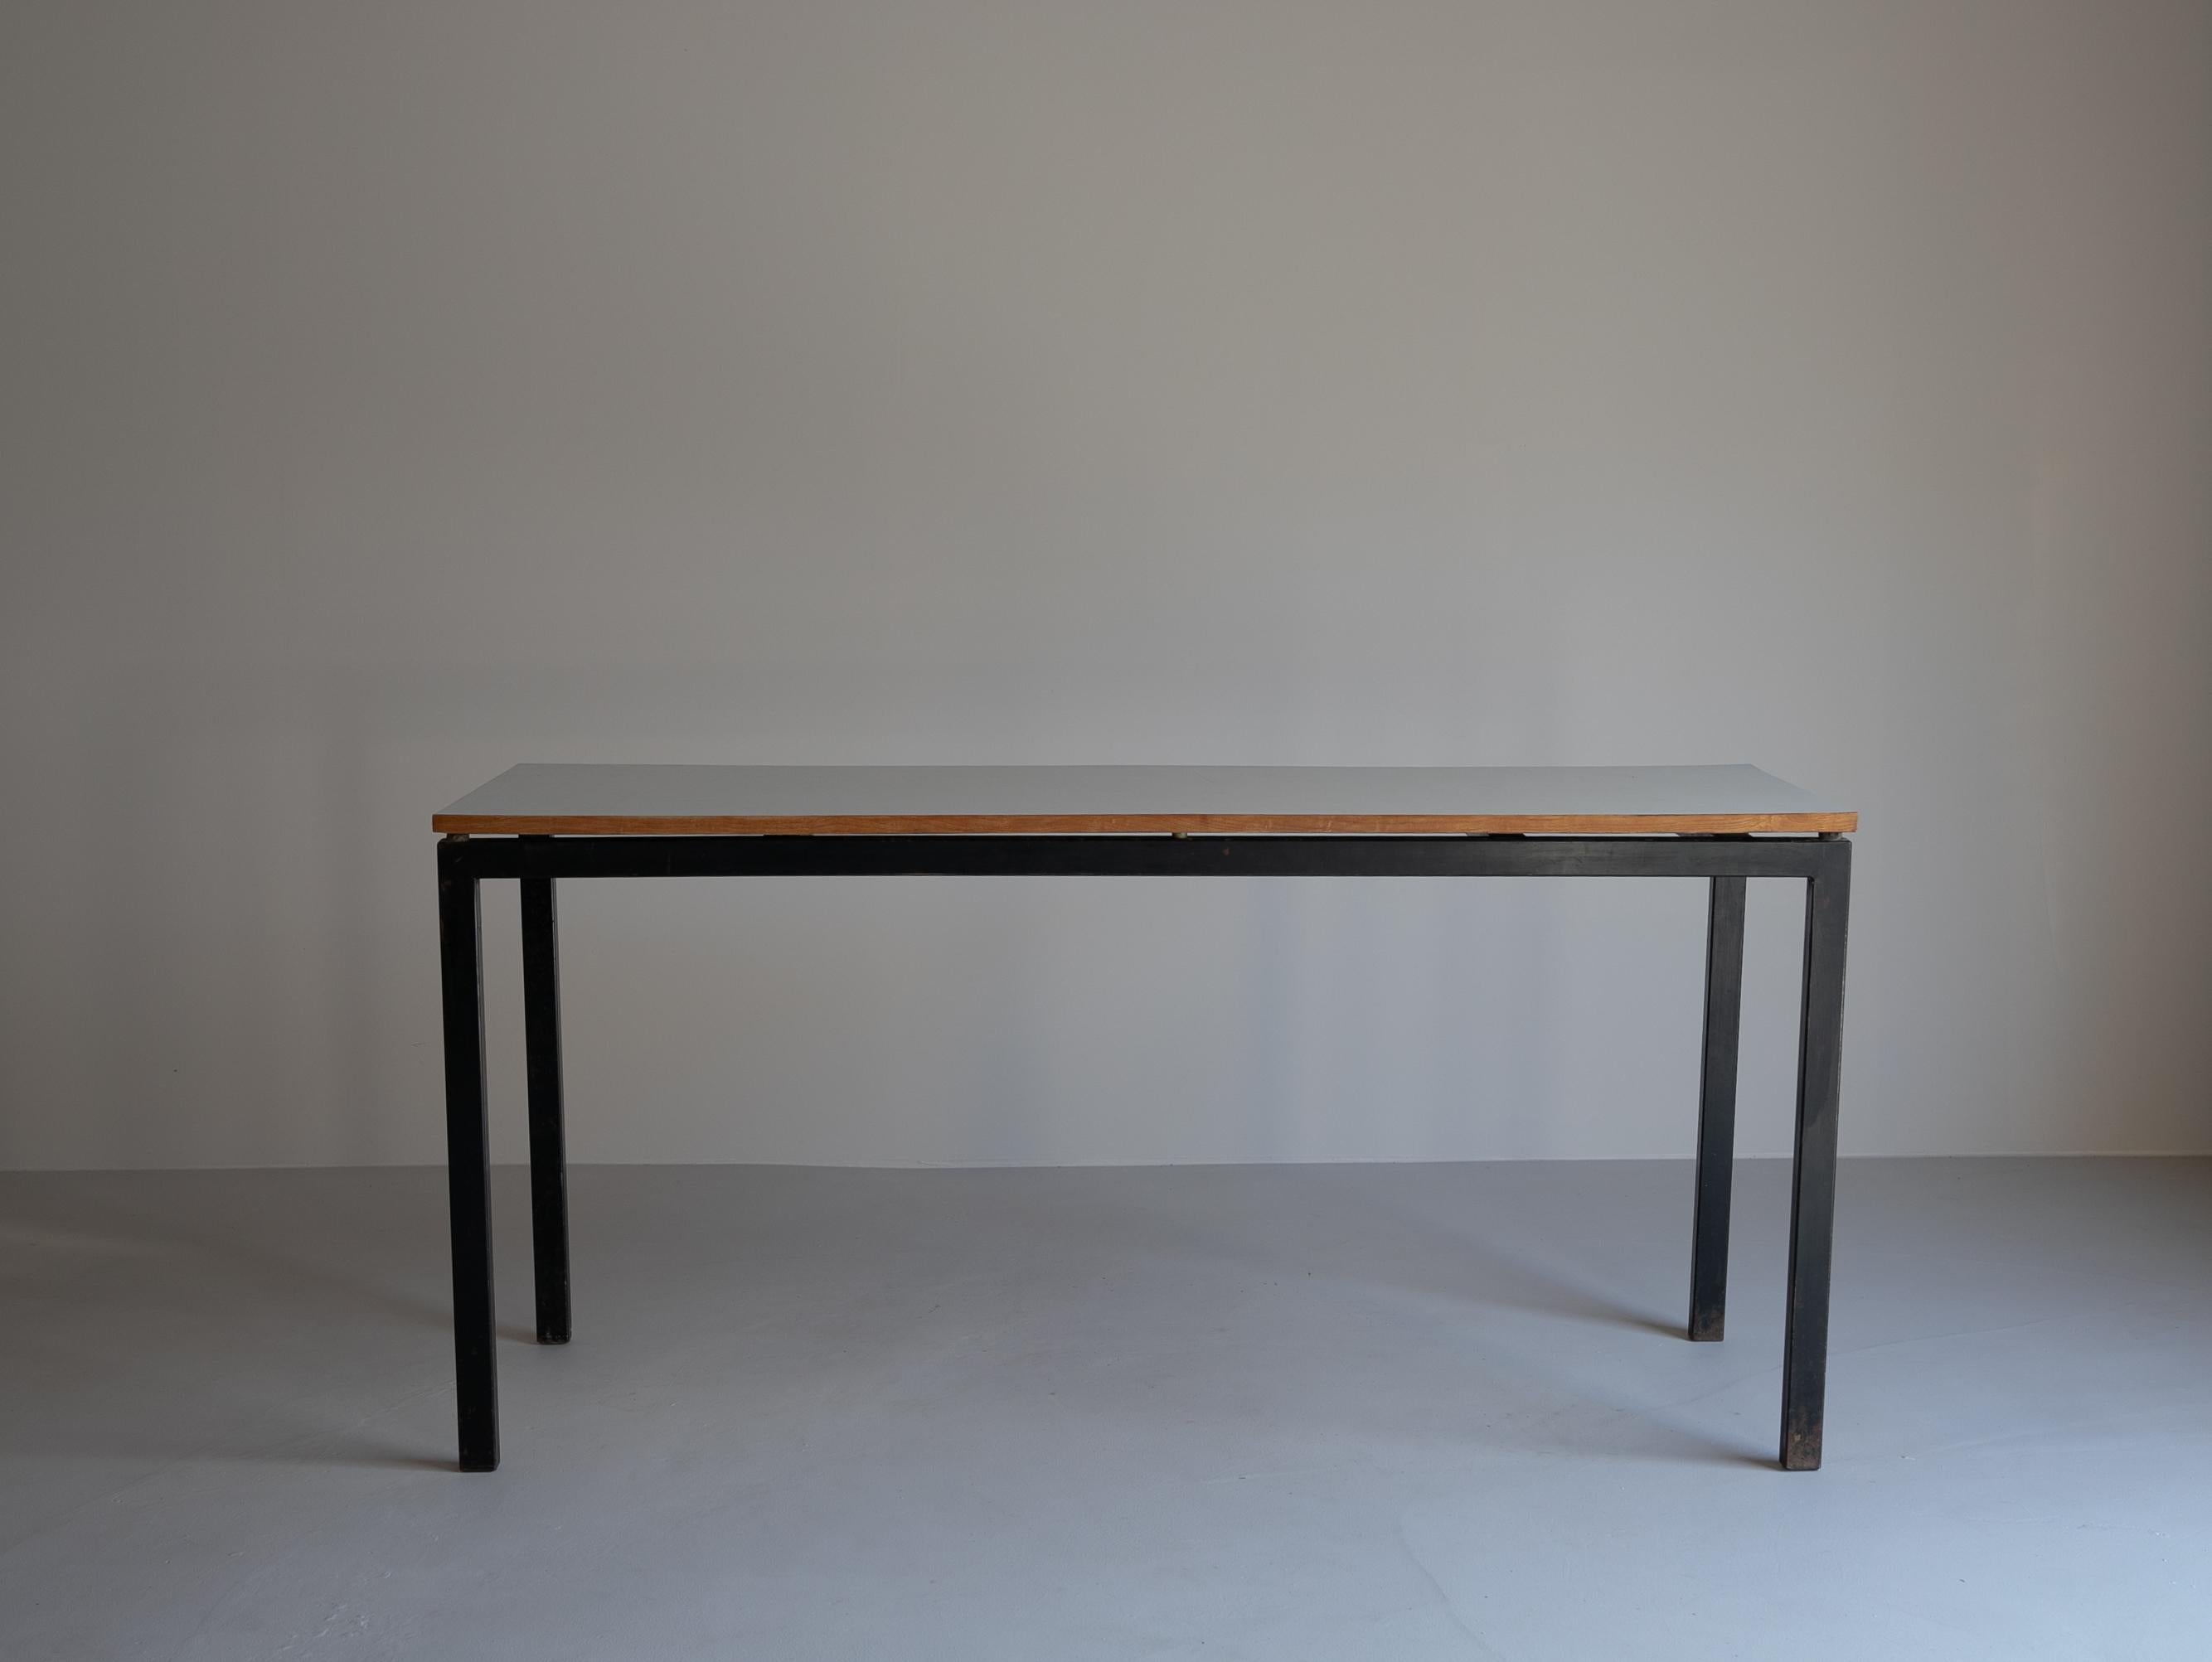 Desk from Cite Cansado by Charlotte Perriand

Designed and manufactured by Charlotte Perriand for the Cite Cansado project in Mauritania, circa 1950.
It is in original condition.
The top panel is white.

Country / Africa
Date / 1950s
Material /